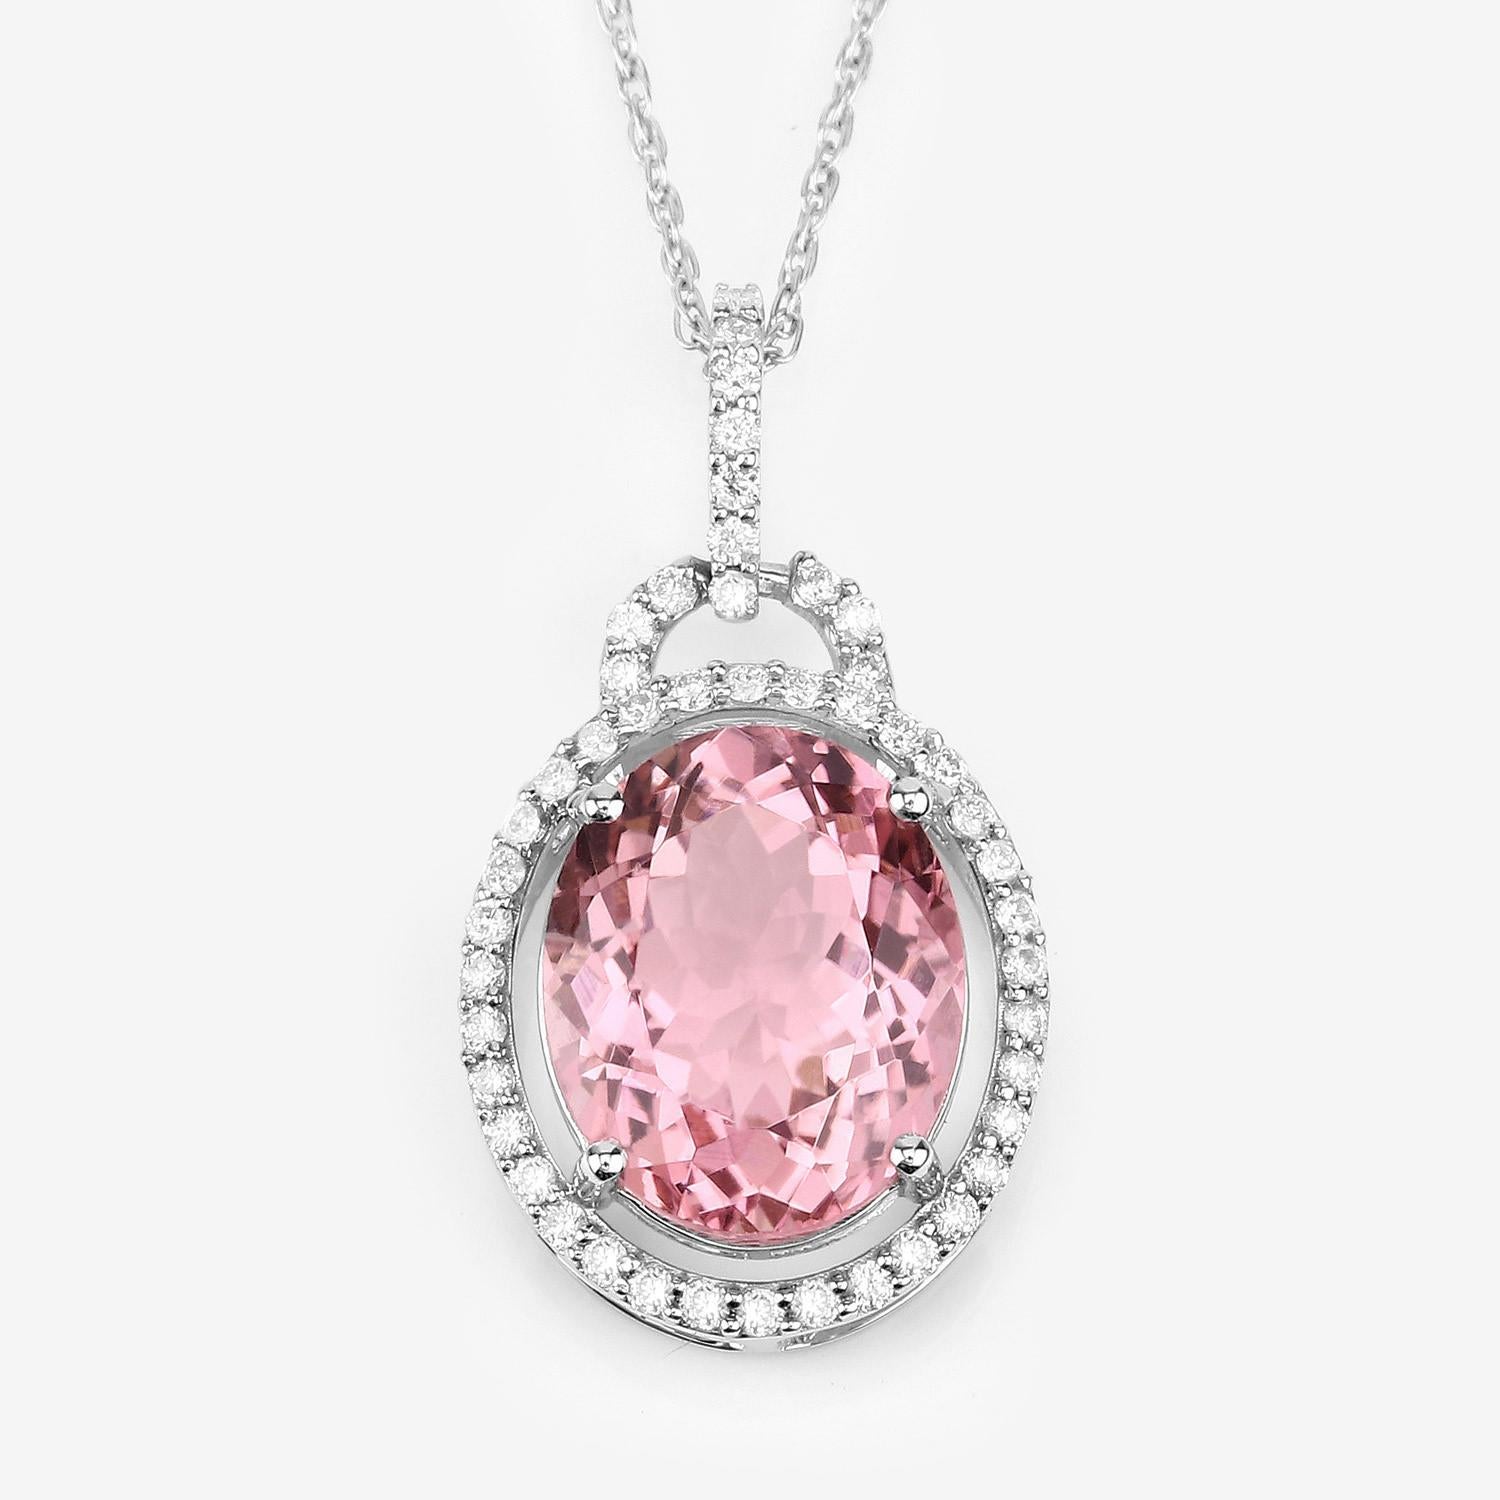 Contemporary Natural Pink Tourmaline Pendant Diamond Setting 3.90 Carats 14K White Gold For Sale